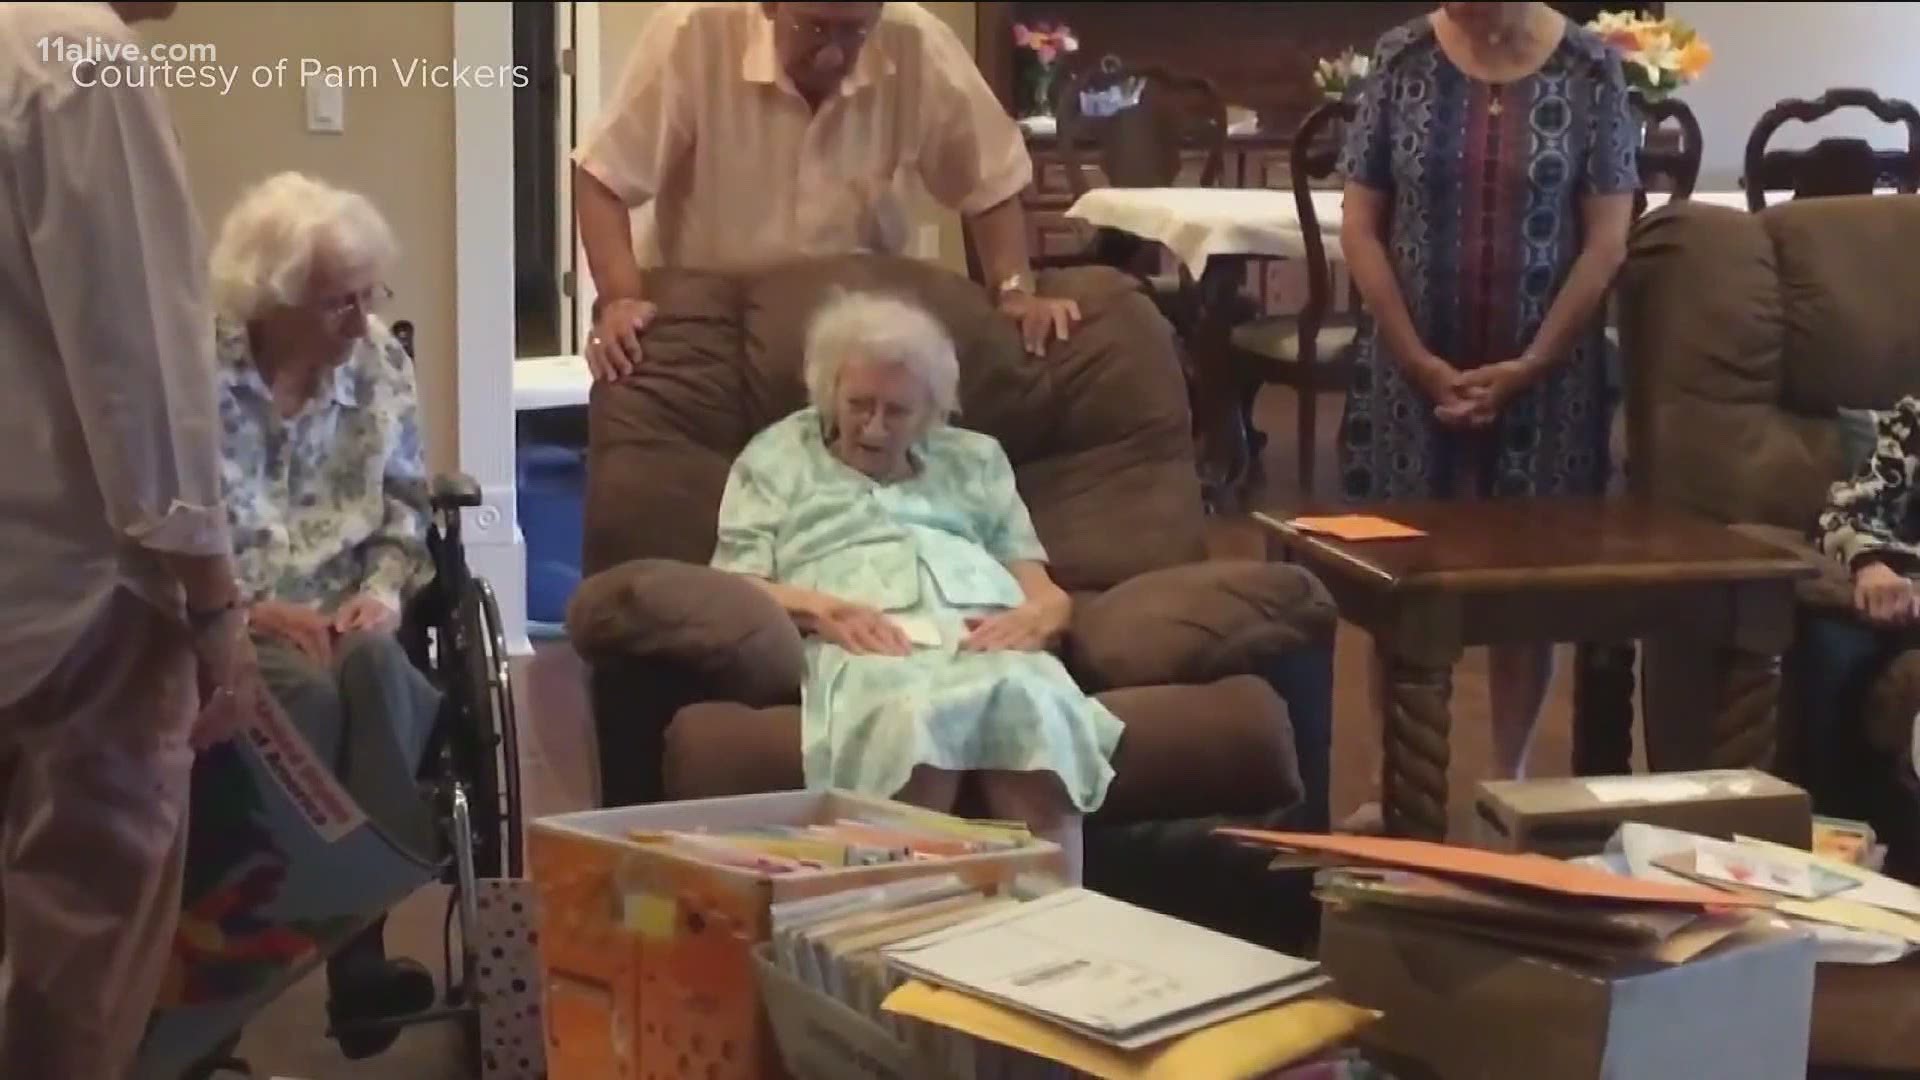 Her granddaughter had people send her birthday cards from everywhere.